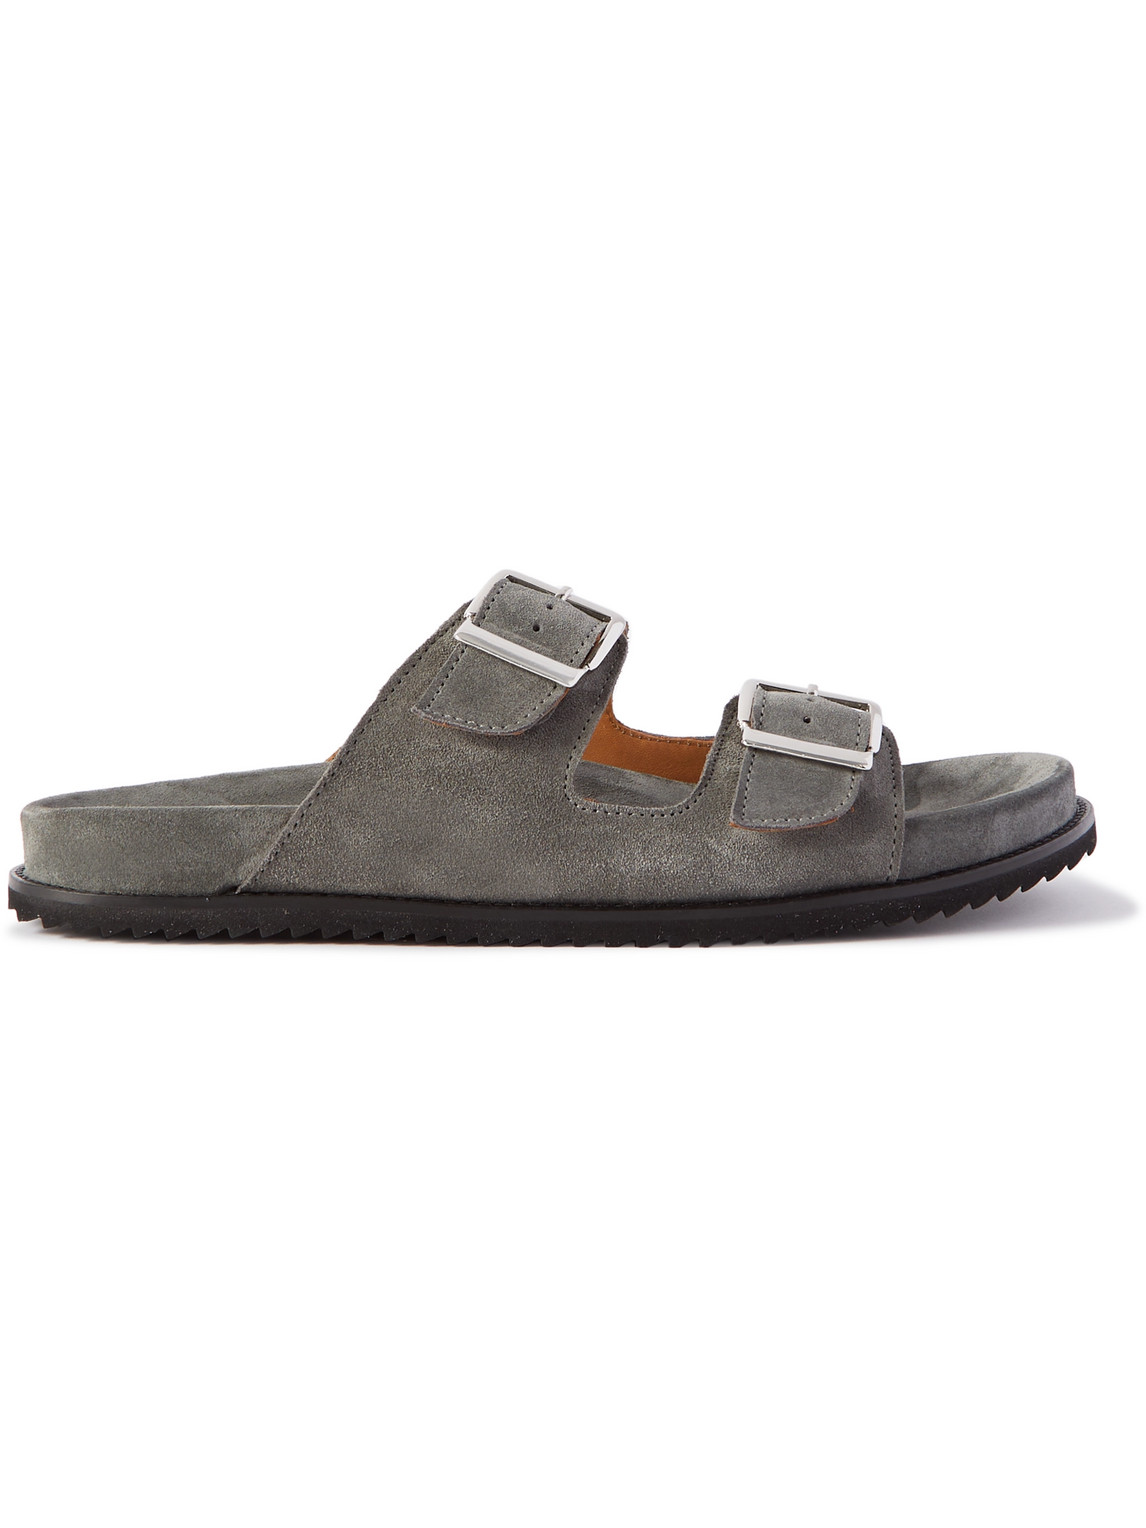 David Buckled Regenerated Suede by evolo® Sandals